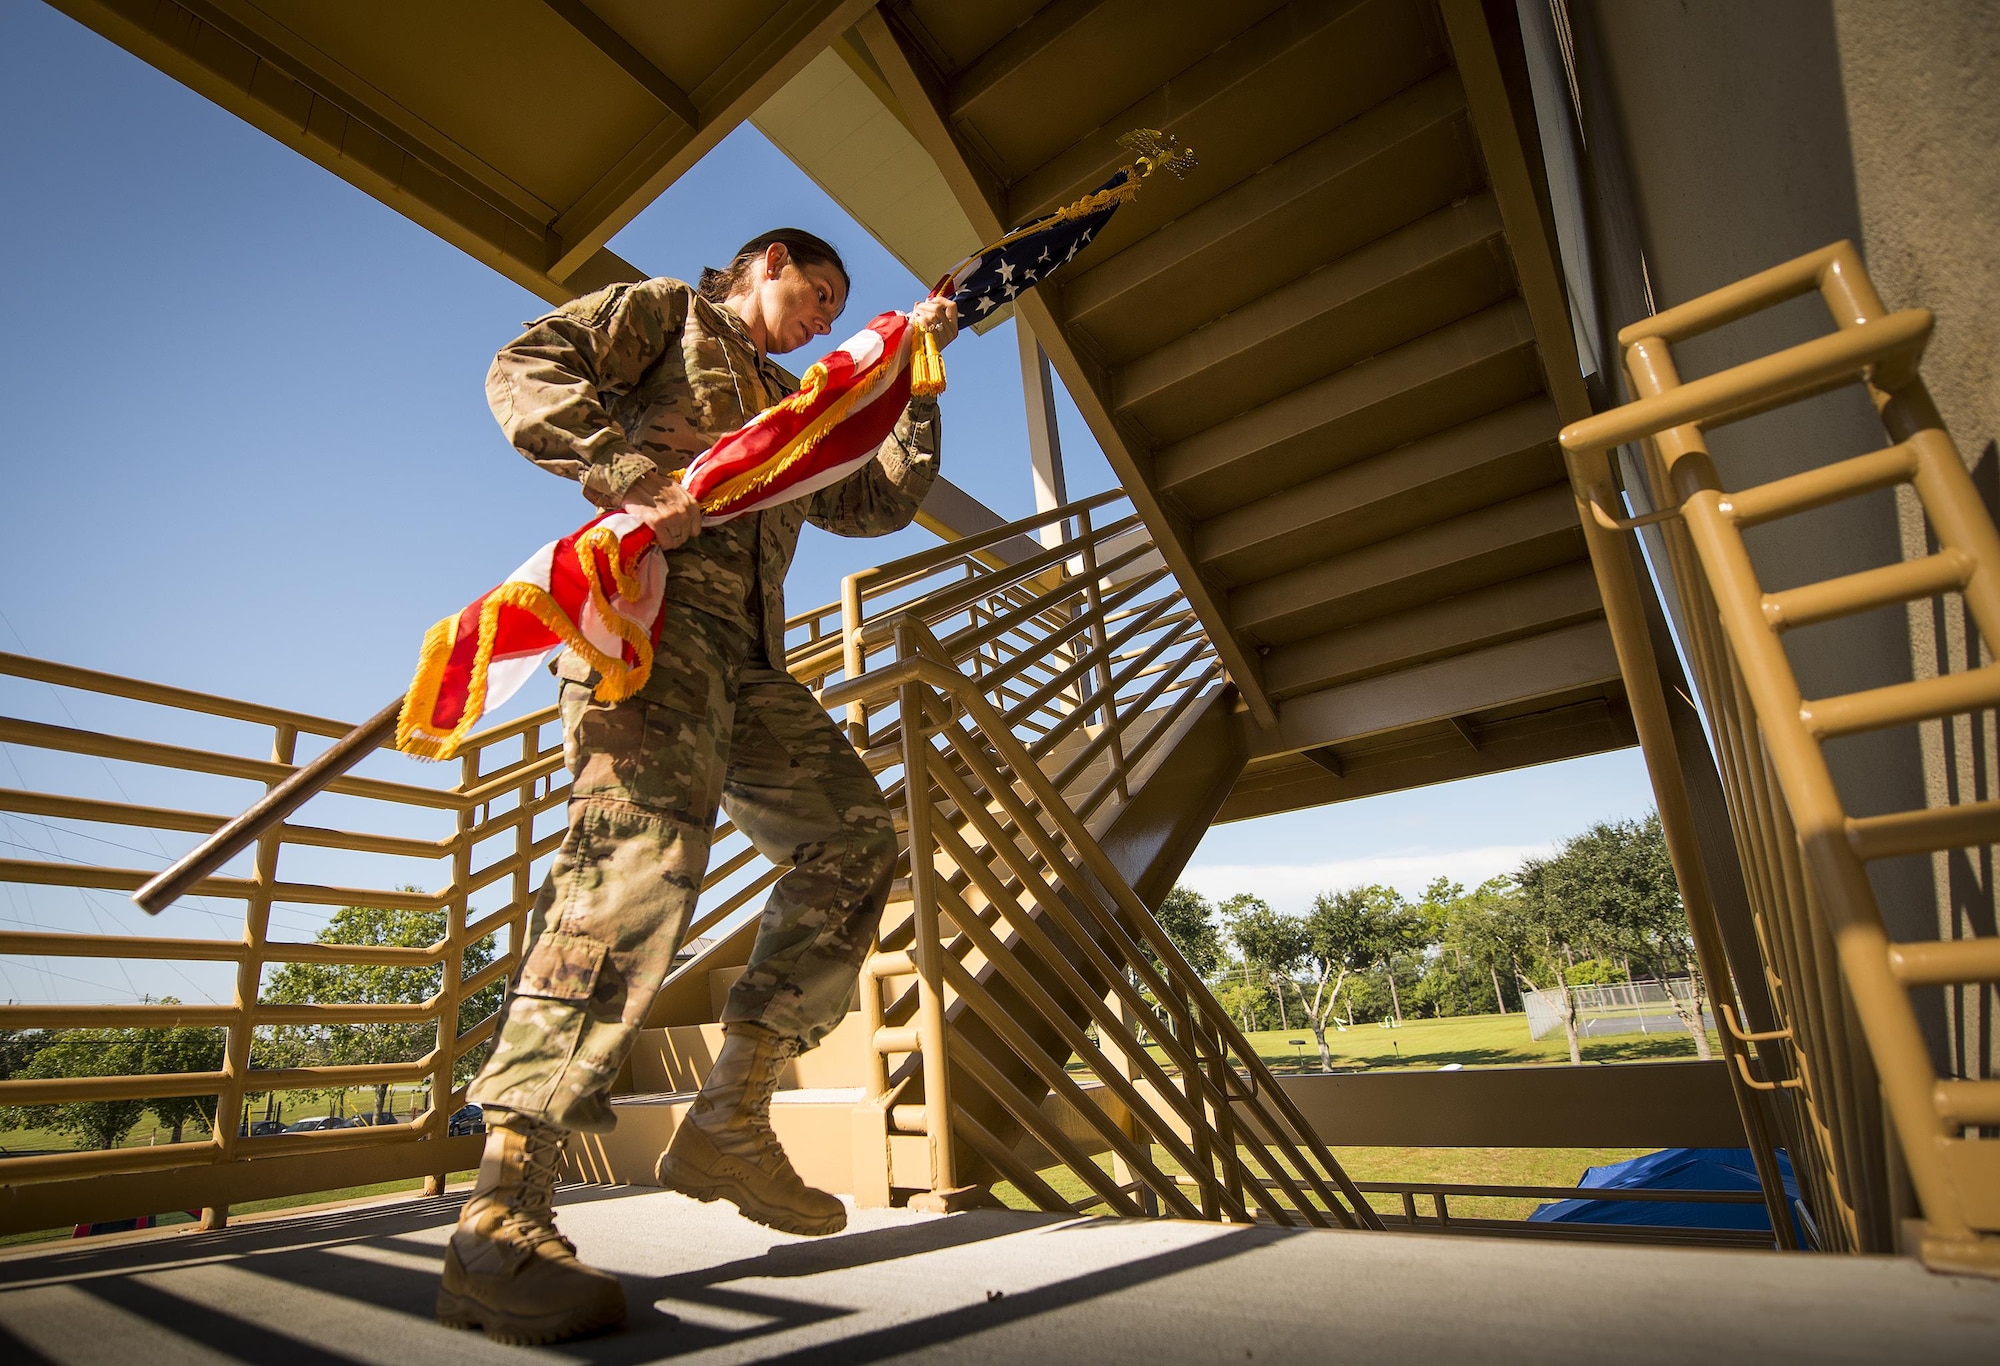 Master Sgt. Leslie Lovegrove, 711th Special Operations Squadron, carries an American flag up a flight of stairs during a 9/11 Memorial Stair Climb event held at Duke Field, Fla., Sept. 10.  The 24-hour climb began at 8:46 a.m. with the 919th Special Operations Wing commander walking the flag up the outside stairwell of the base’s billeting facility.  Wing Airmen took turns walking the flag up and down the stairwell the entire day until it was delivered to a firefighter and security forces color guard at 8:46 a.m. the next morning for a 9/11 Remembrance ceremony. More than 115 Airmen carried the flag throughout the day and night for a total of more than 207,000 steps. (U.S. Air Force photo/Tech. Sgt. Sam King)